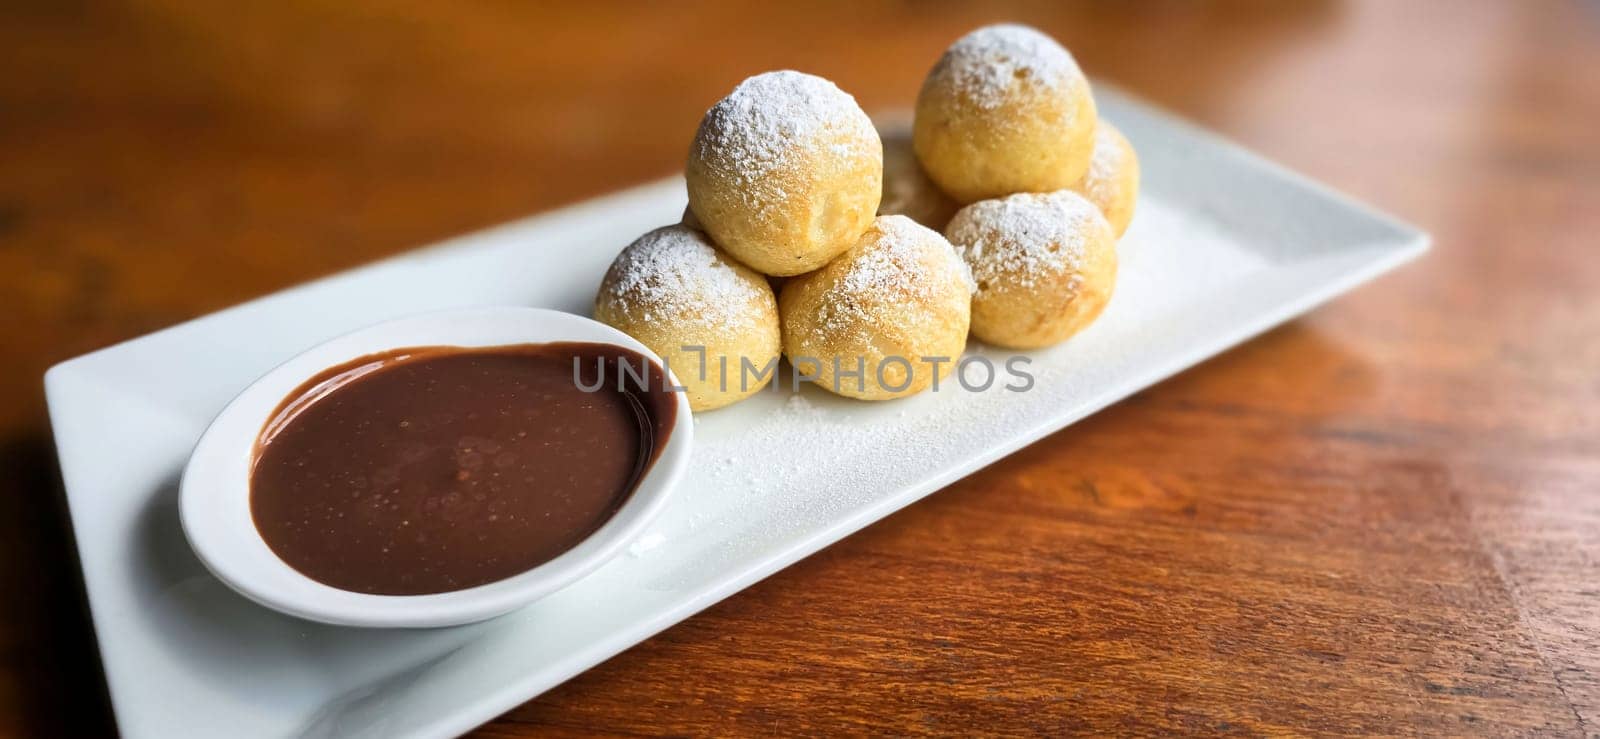 Homemade Dutch poffertjes mini pancakes with icing powdered sugar and chocolate fillings with additional chocolate sauce by antoksena